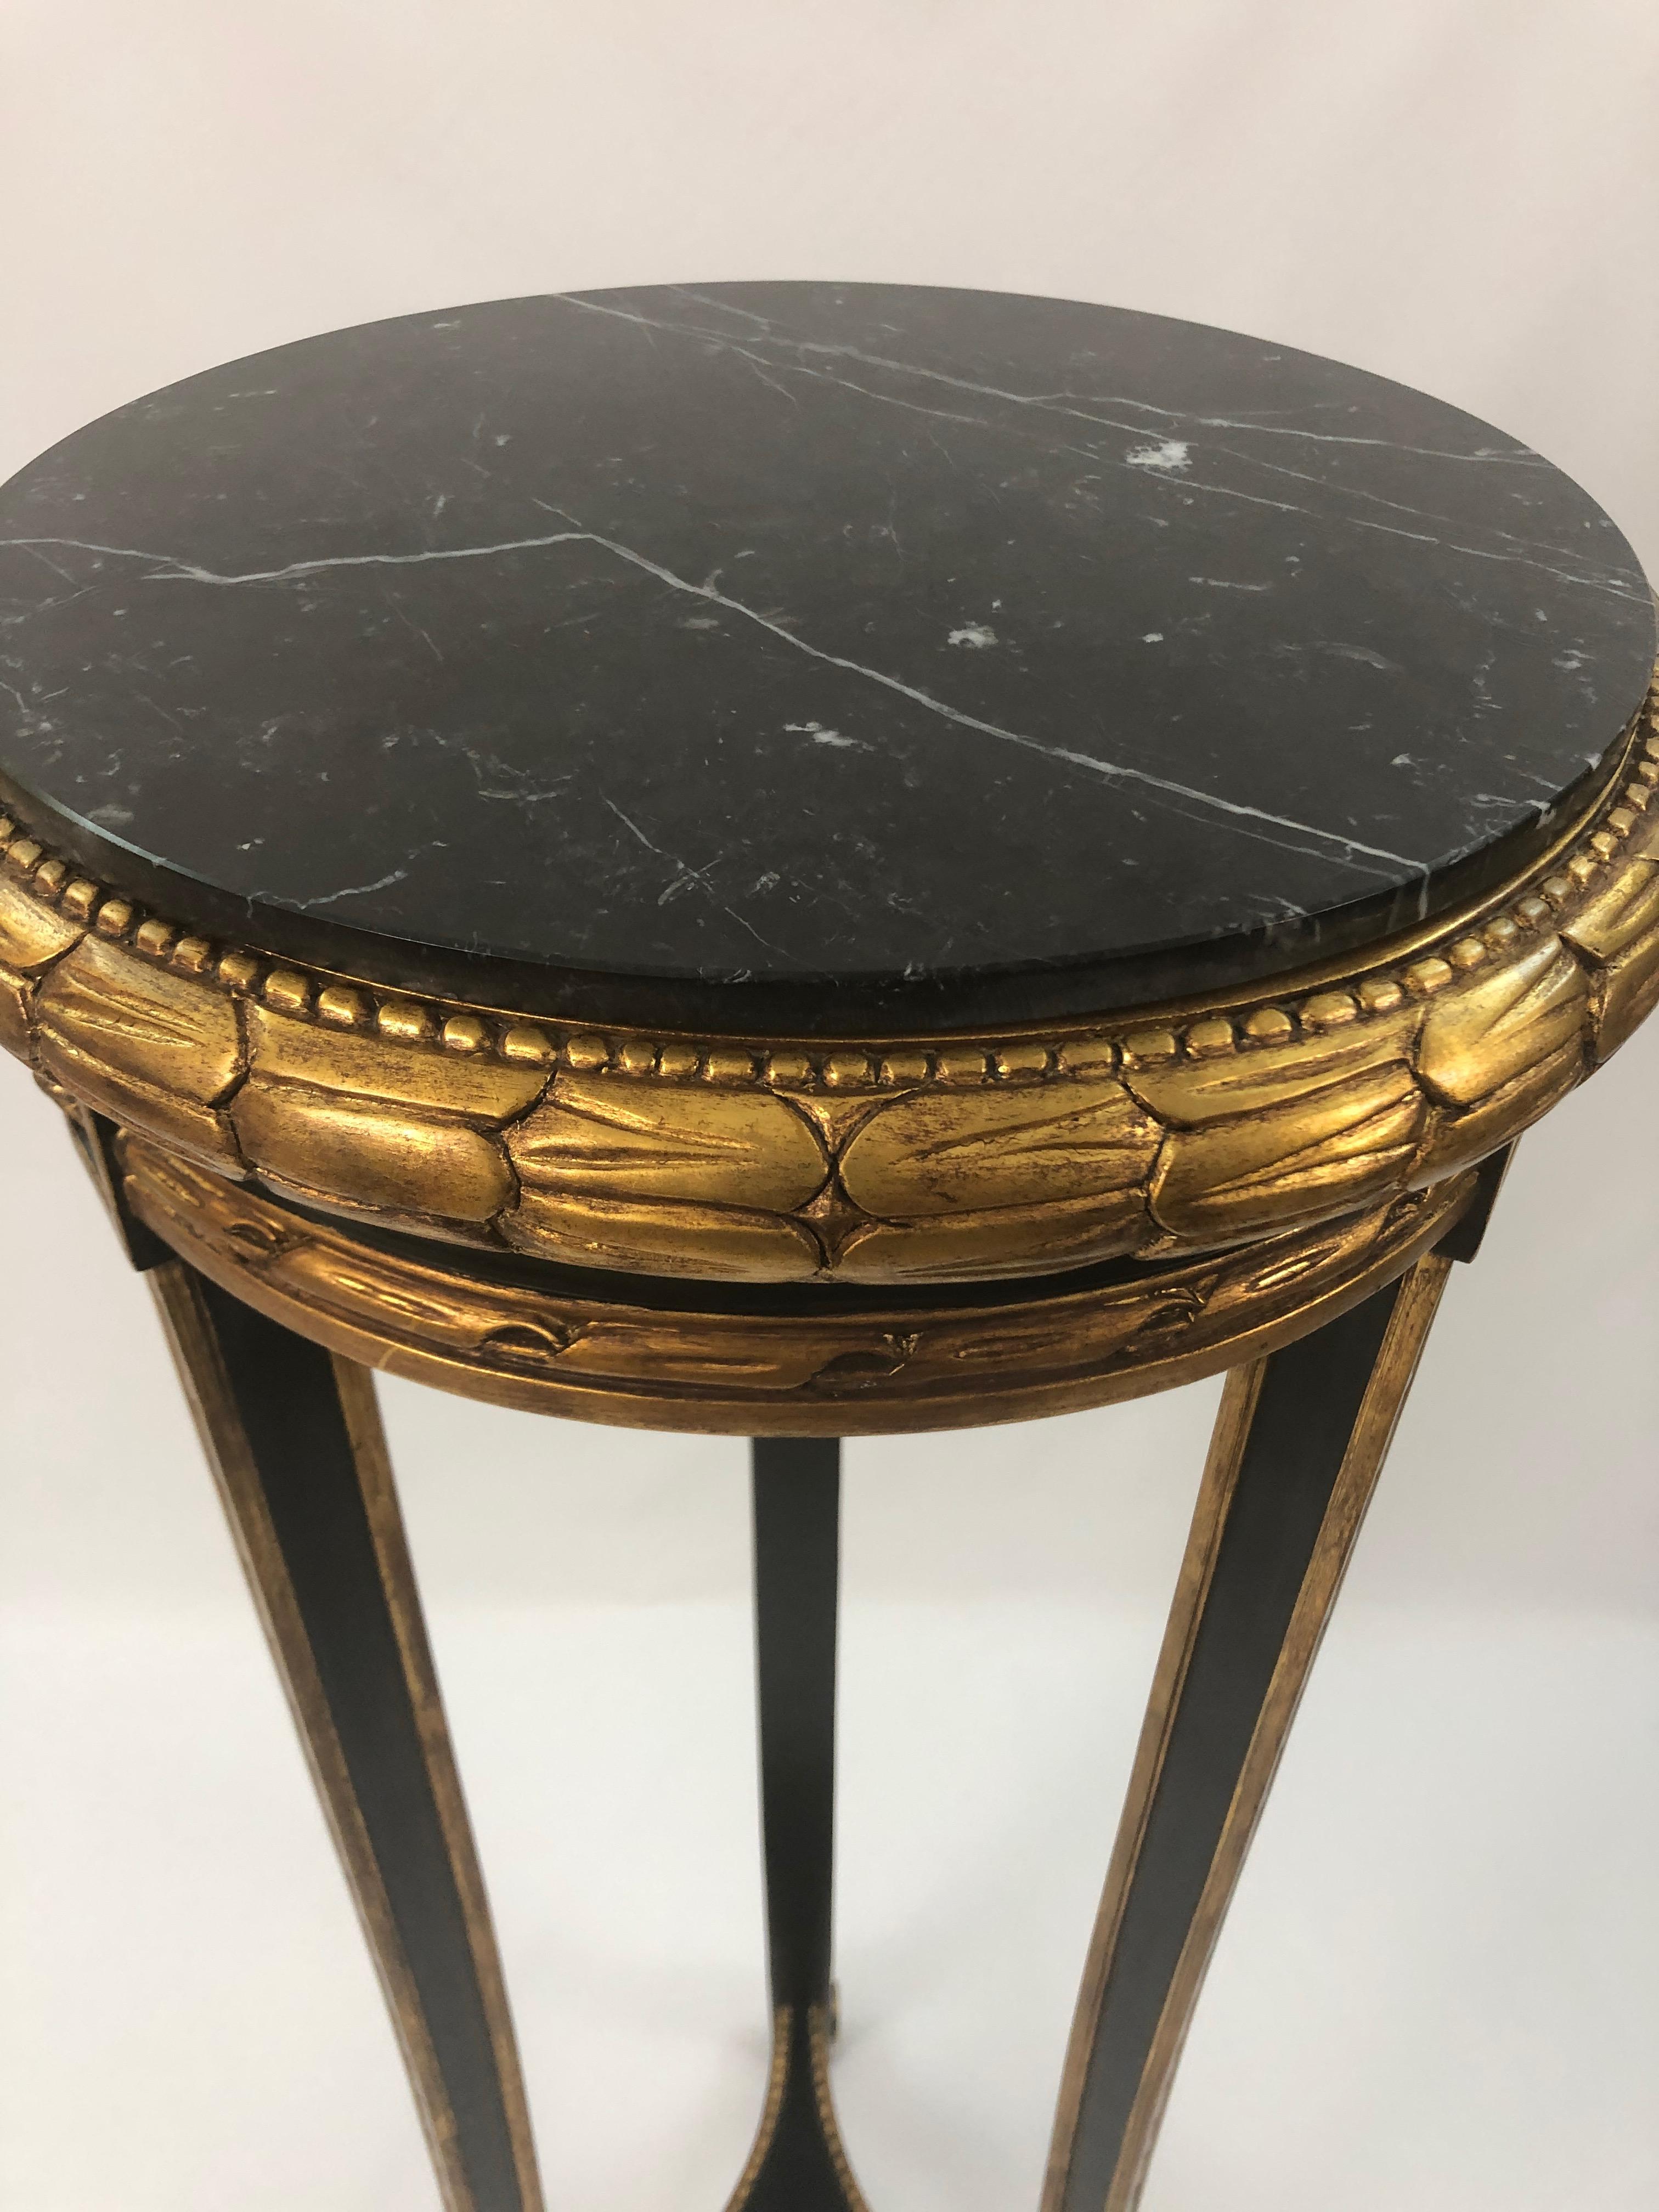 Beautiful Regency style ebonized and gilded stand having black and white veined marble top.